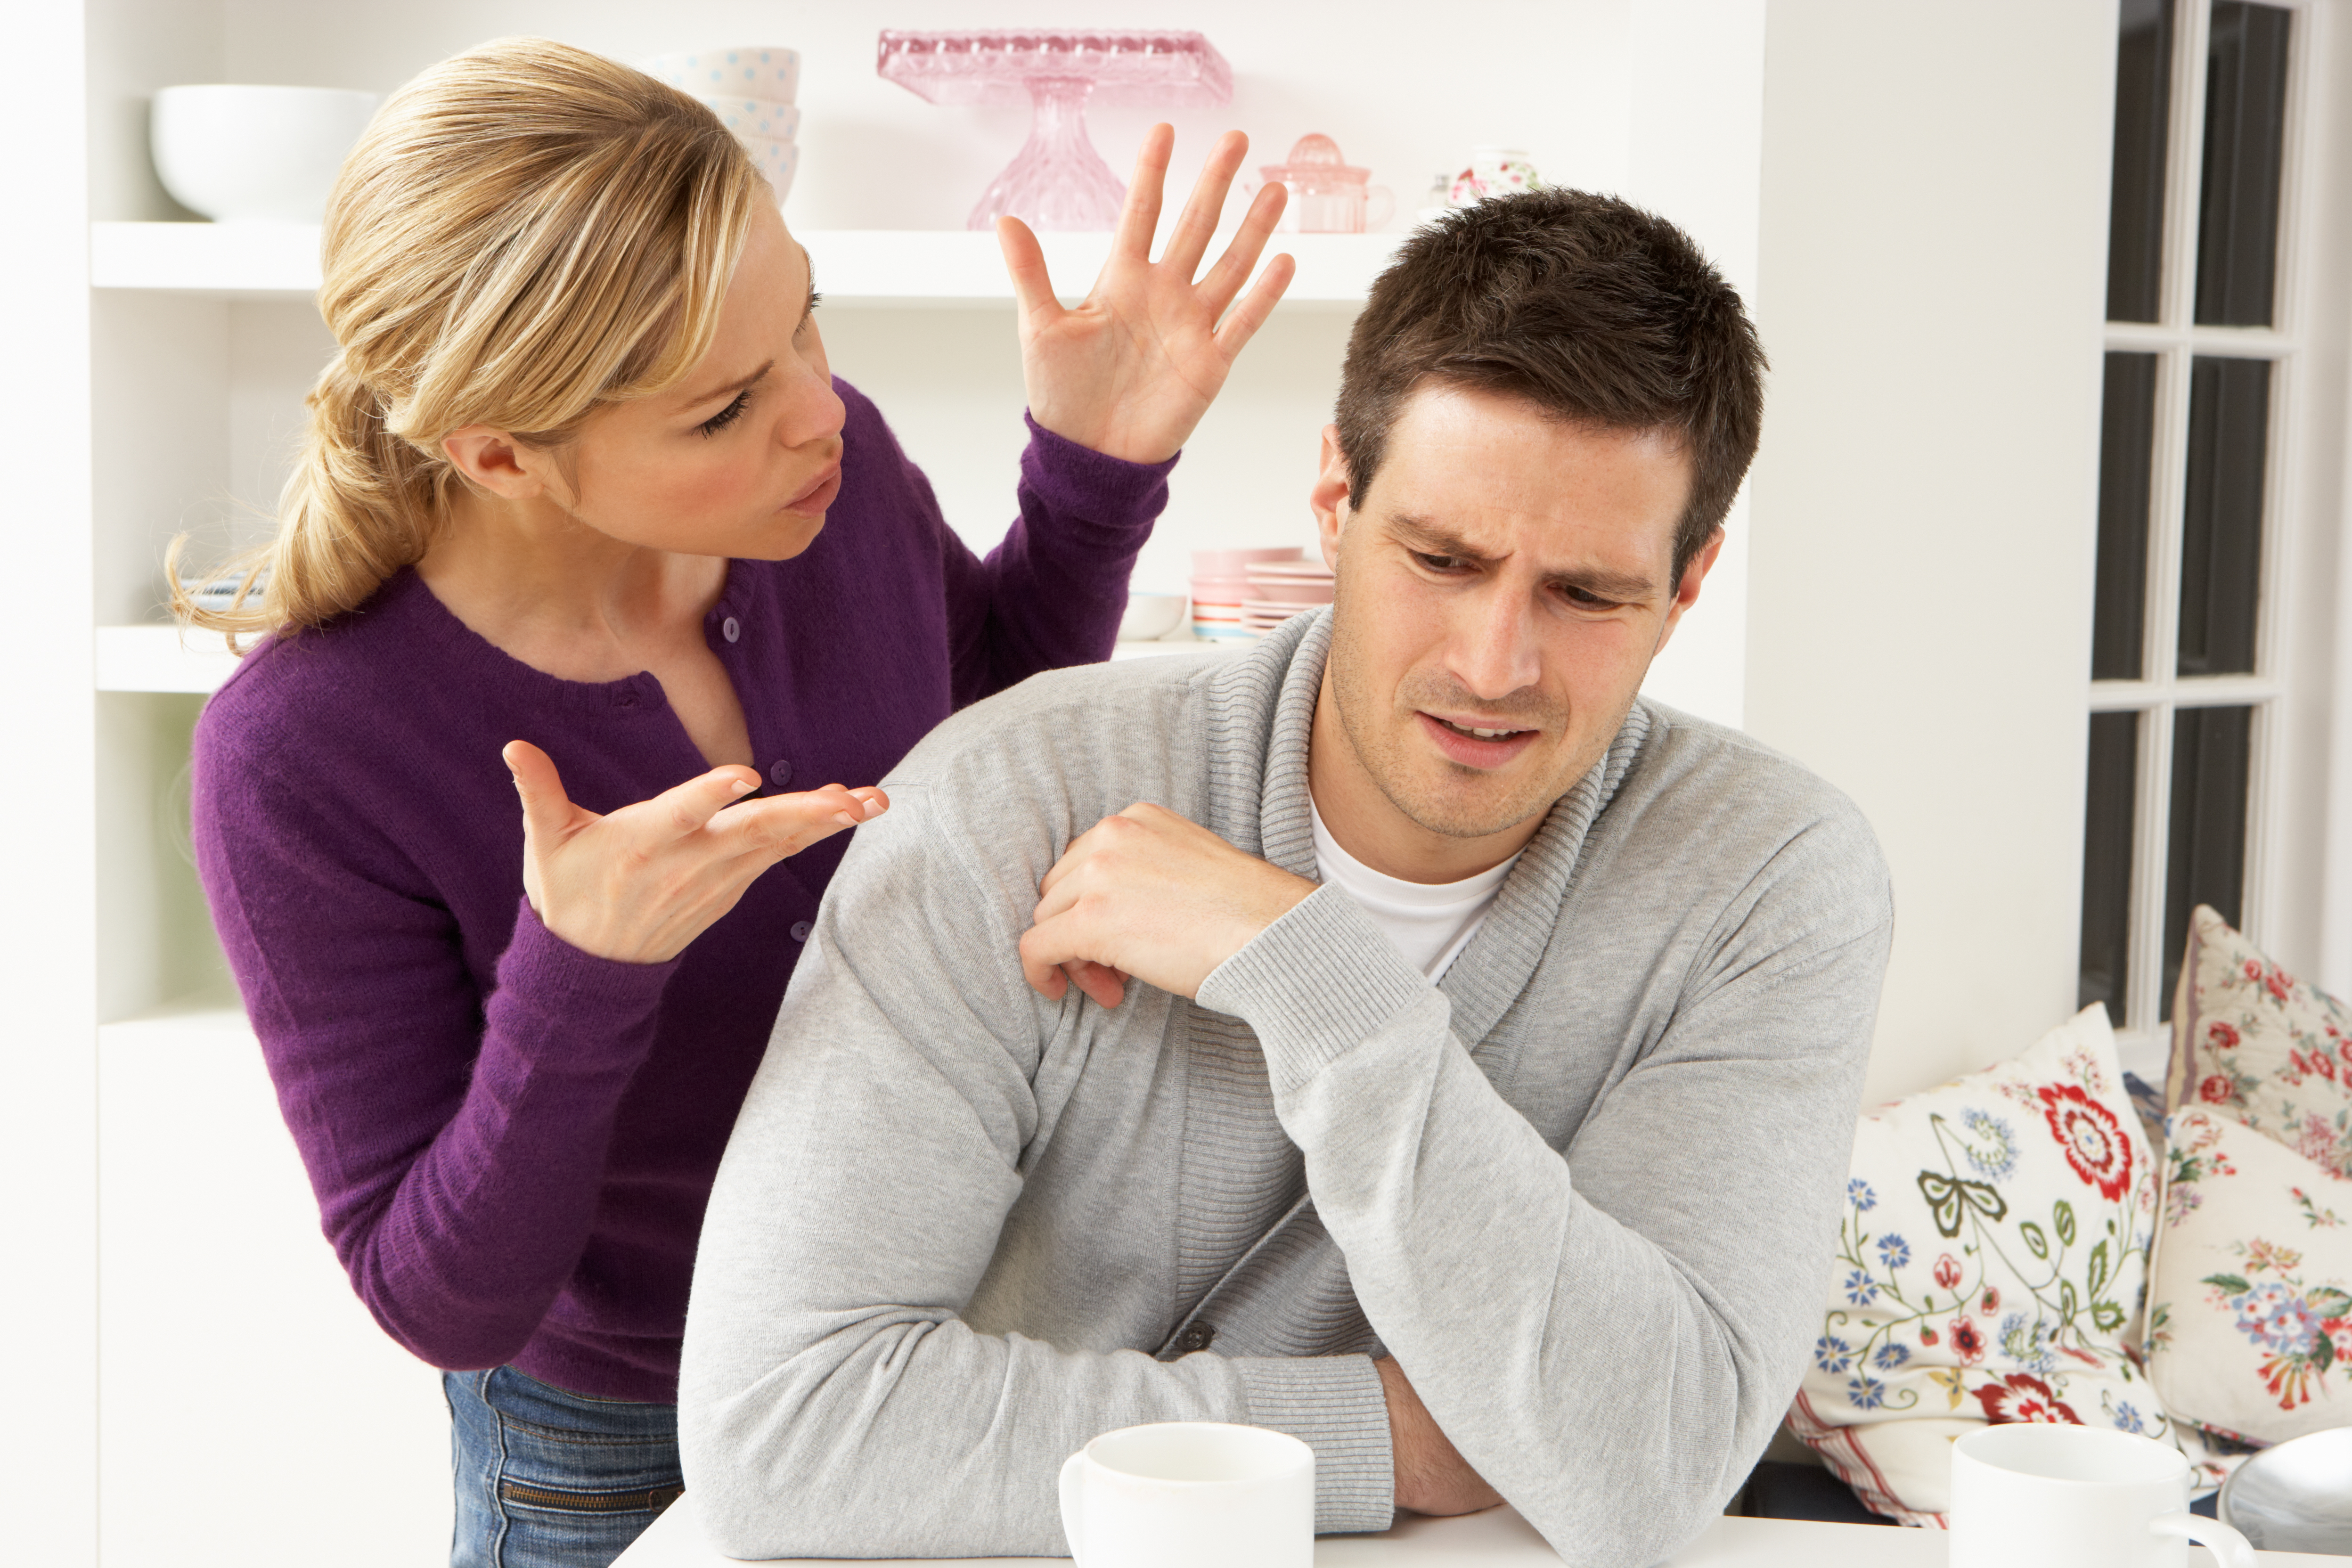 When Can You Claim Self-Defense in Domestic Battery - Domestic Battery Lawyer Chicago